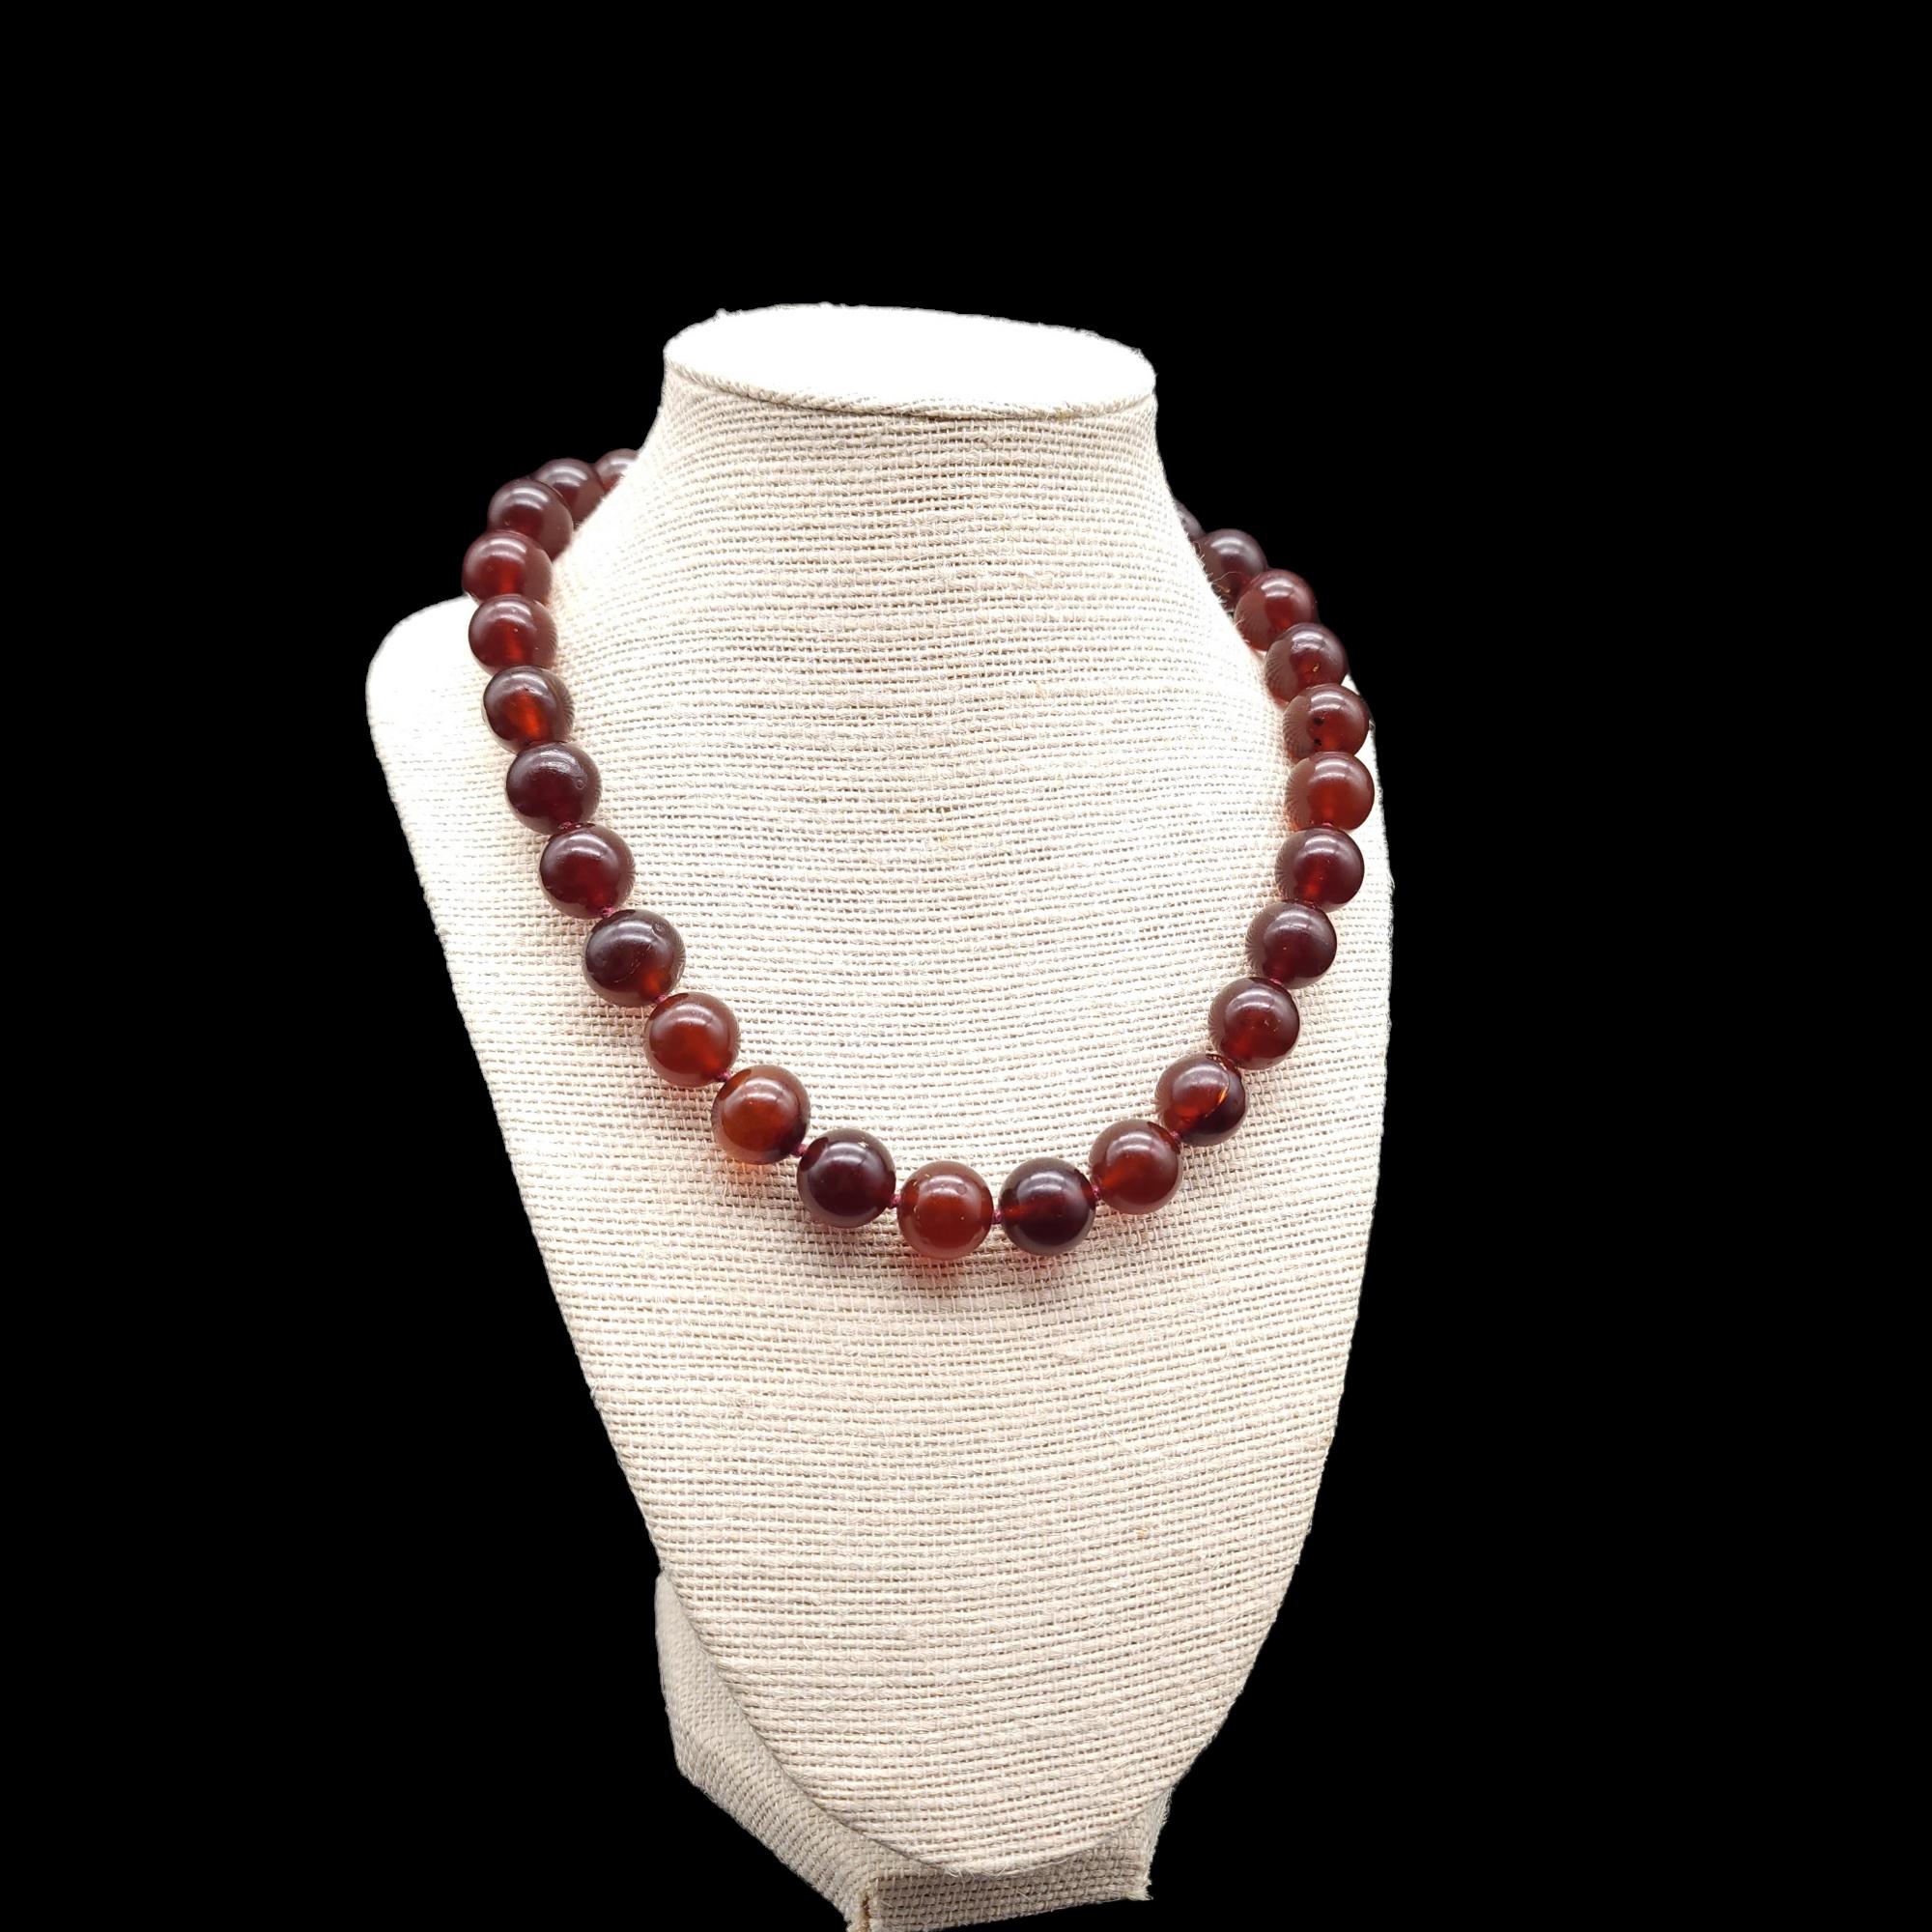 This vintage necklace features polished dark amber beads that have a rich and warm glow. The beads are strung on a sturdy, yet elegant cord with a sterling silver clasp. The necklace has a collar style that hugs the neck. Each amber bead has a